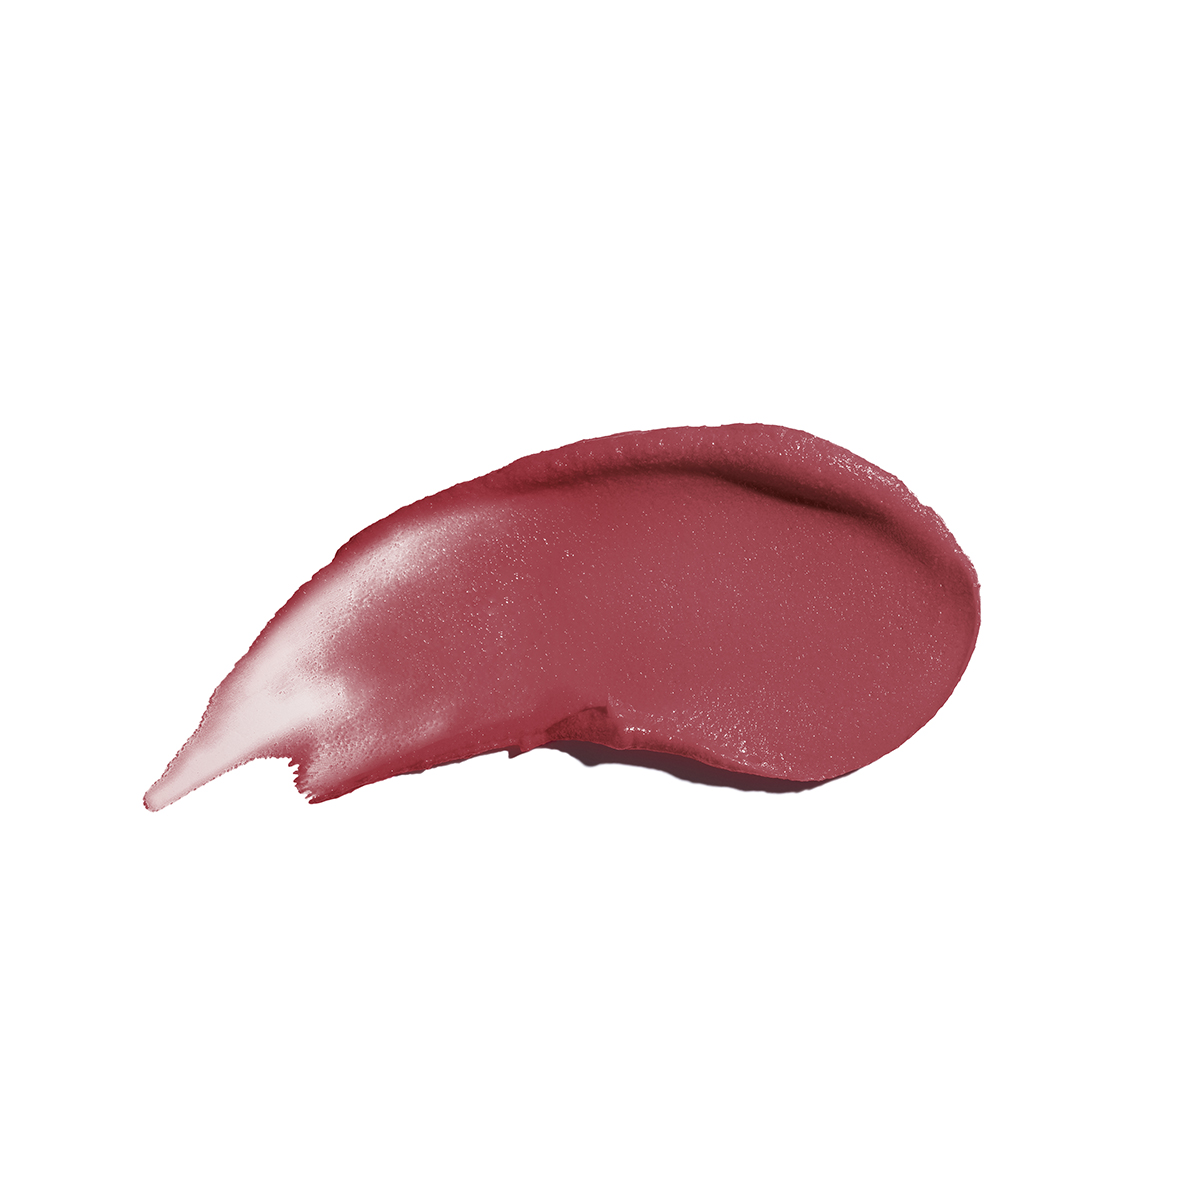 Clarins Lip Milky Mousse Milky Rosewood